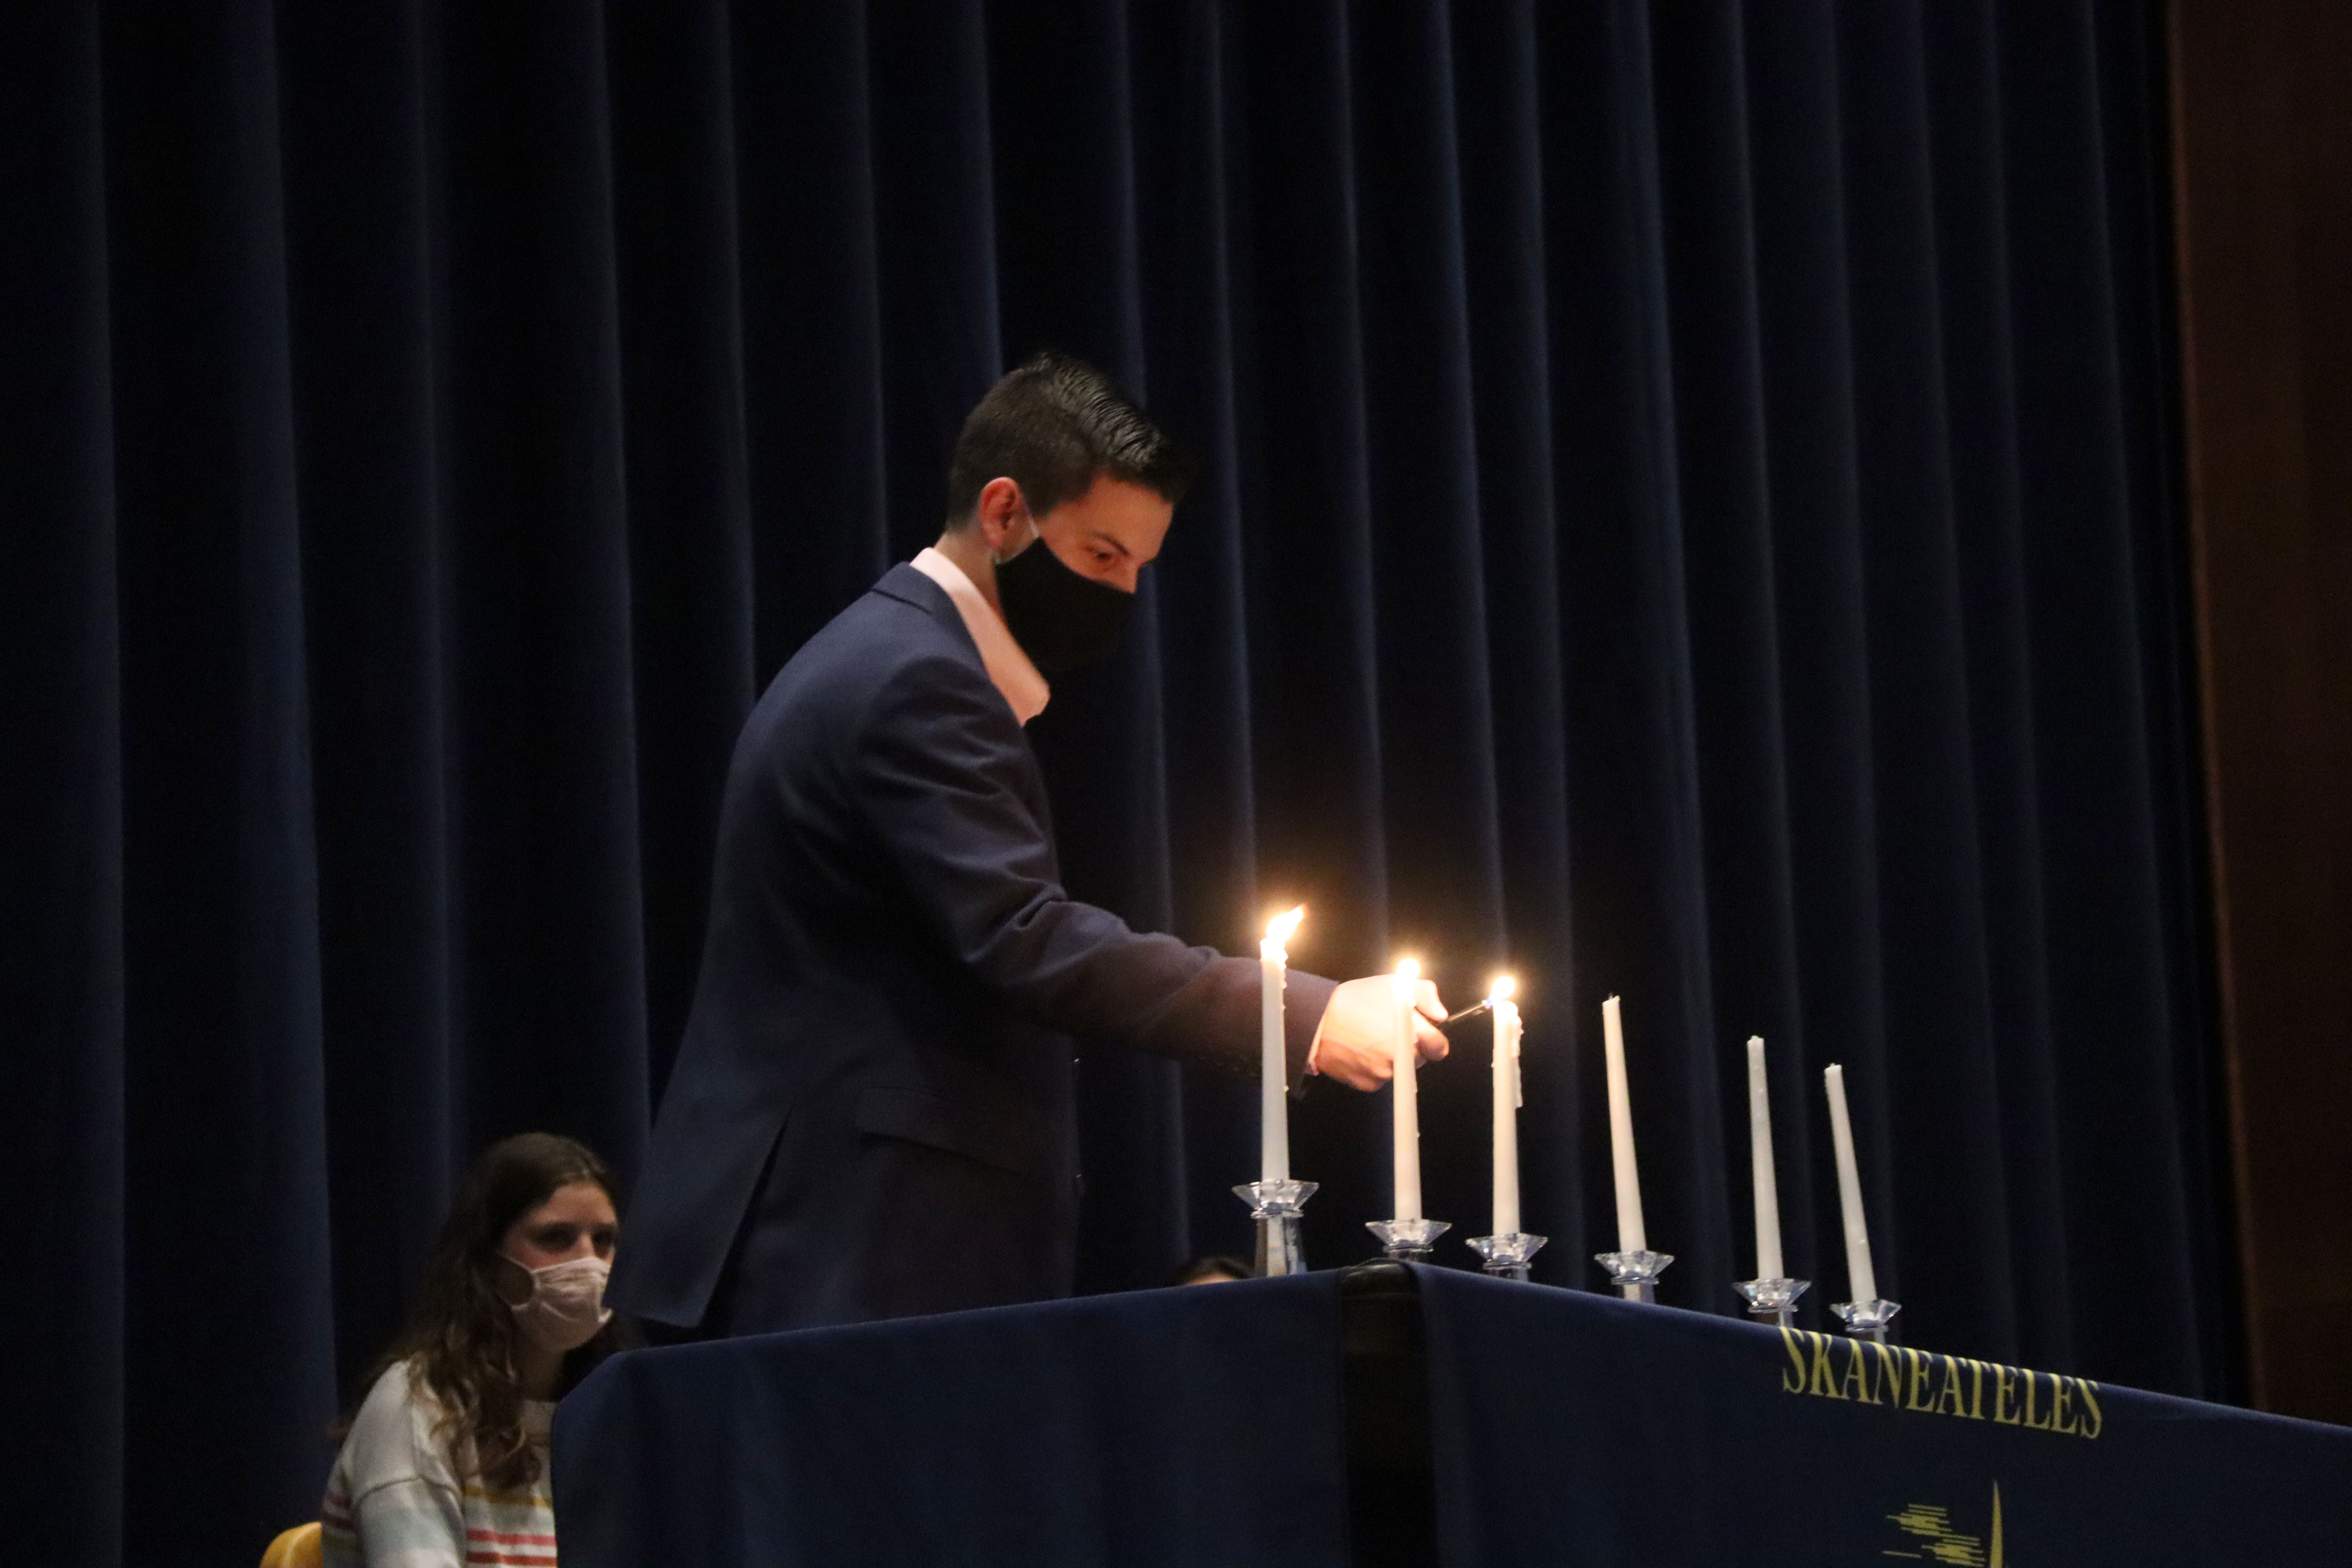 NJHS inductee lights candle at the induction ceremony